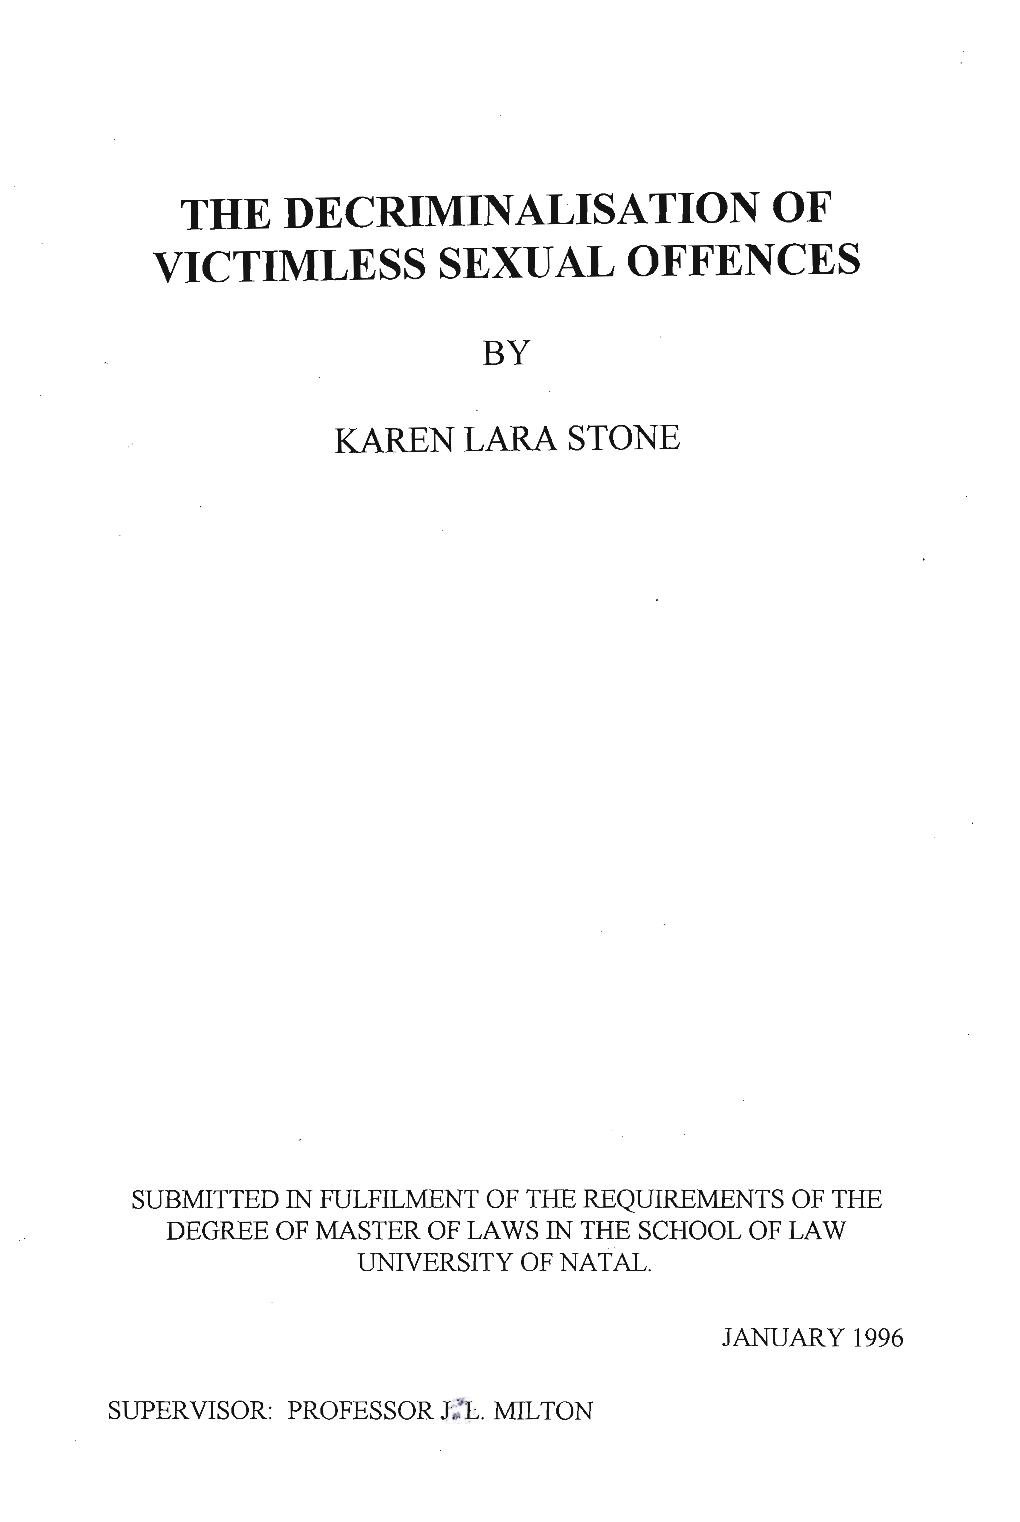 The Decriminalisation of Victimless Sexual Offences